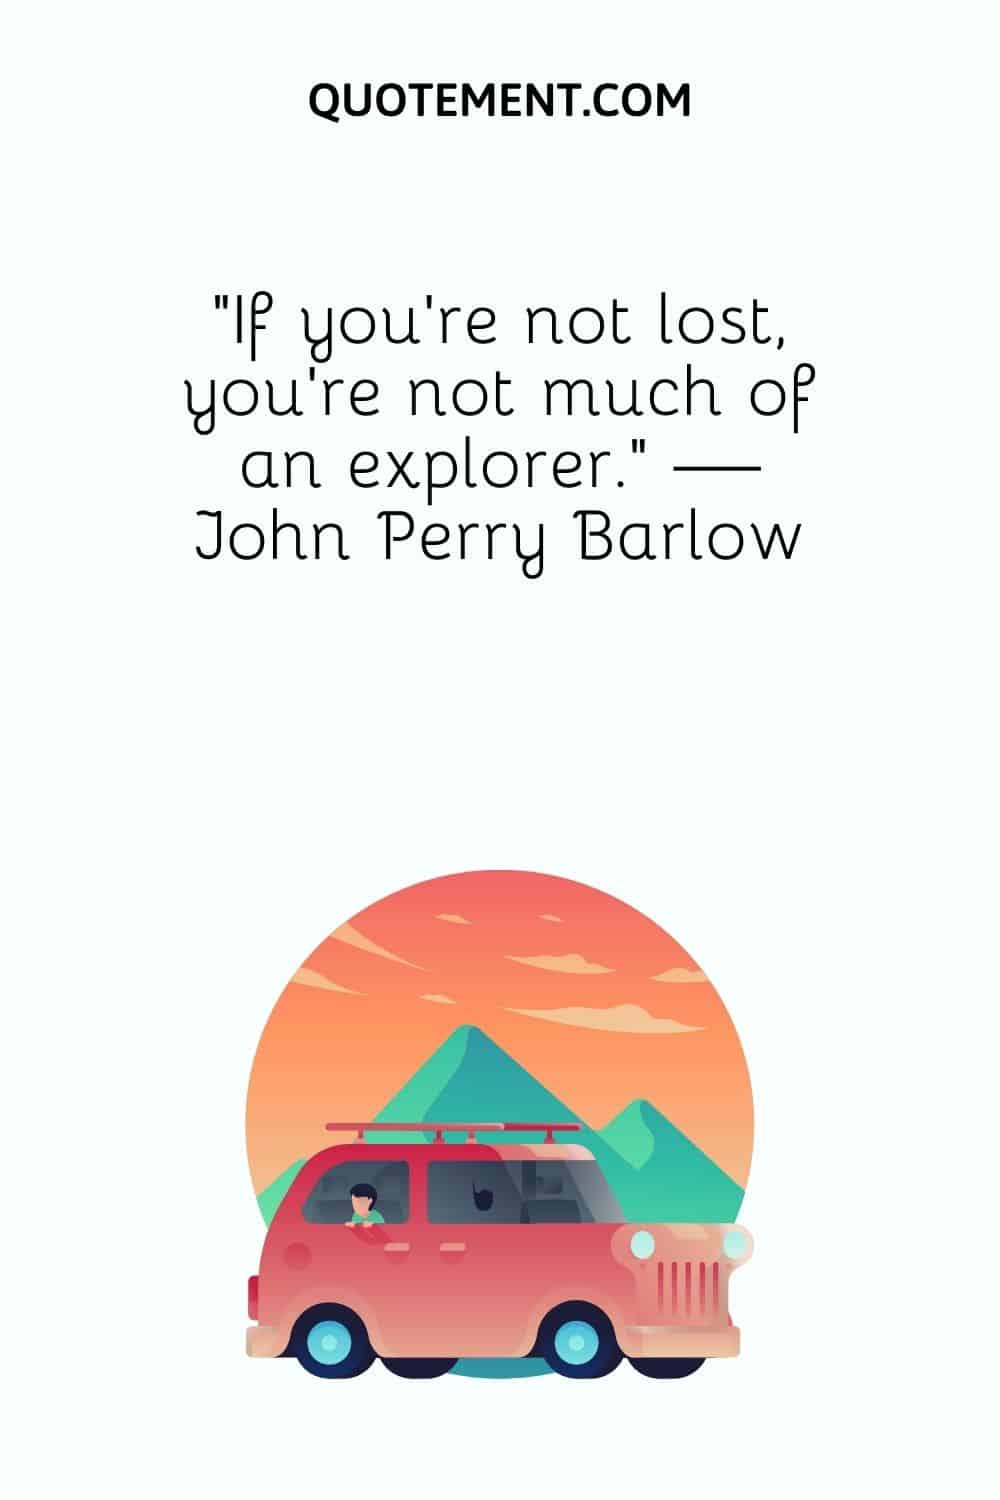 If you’re not lost, you’re not much of an explorer